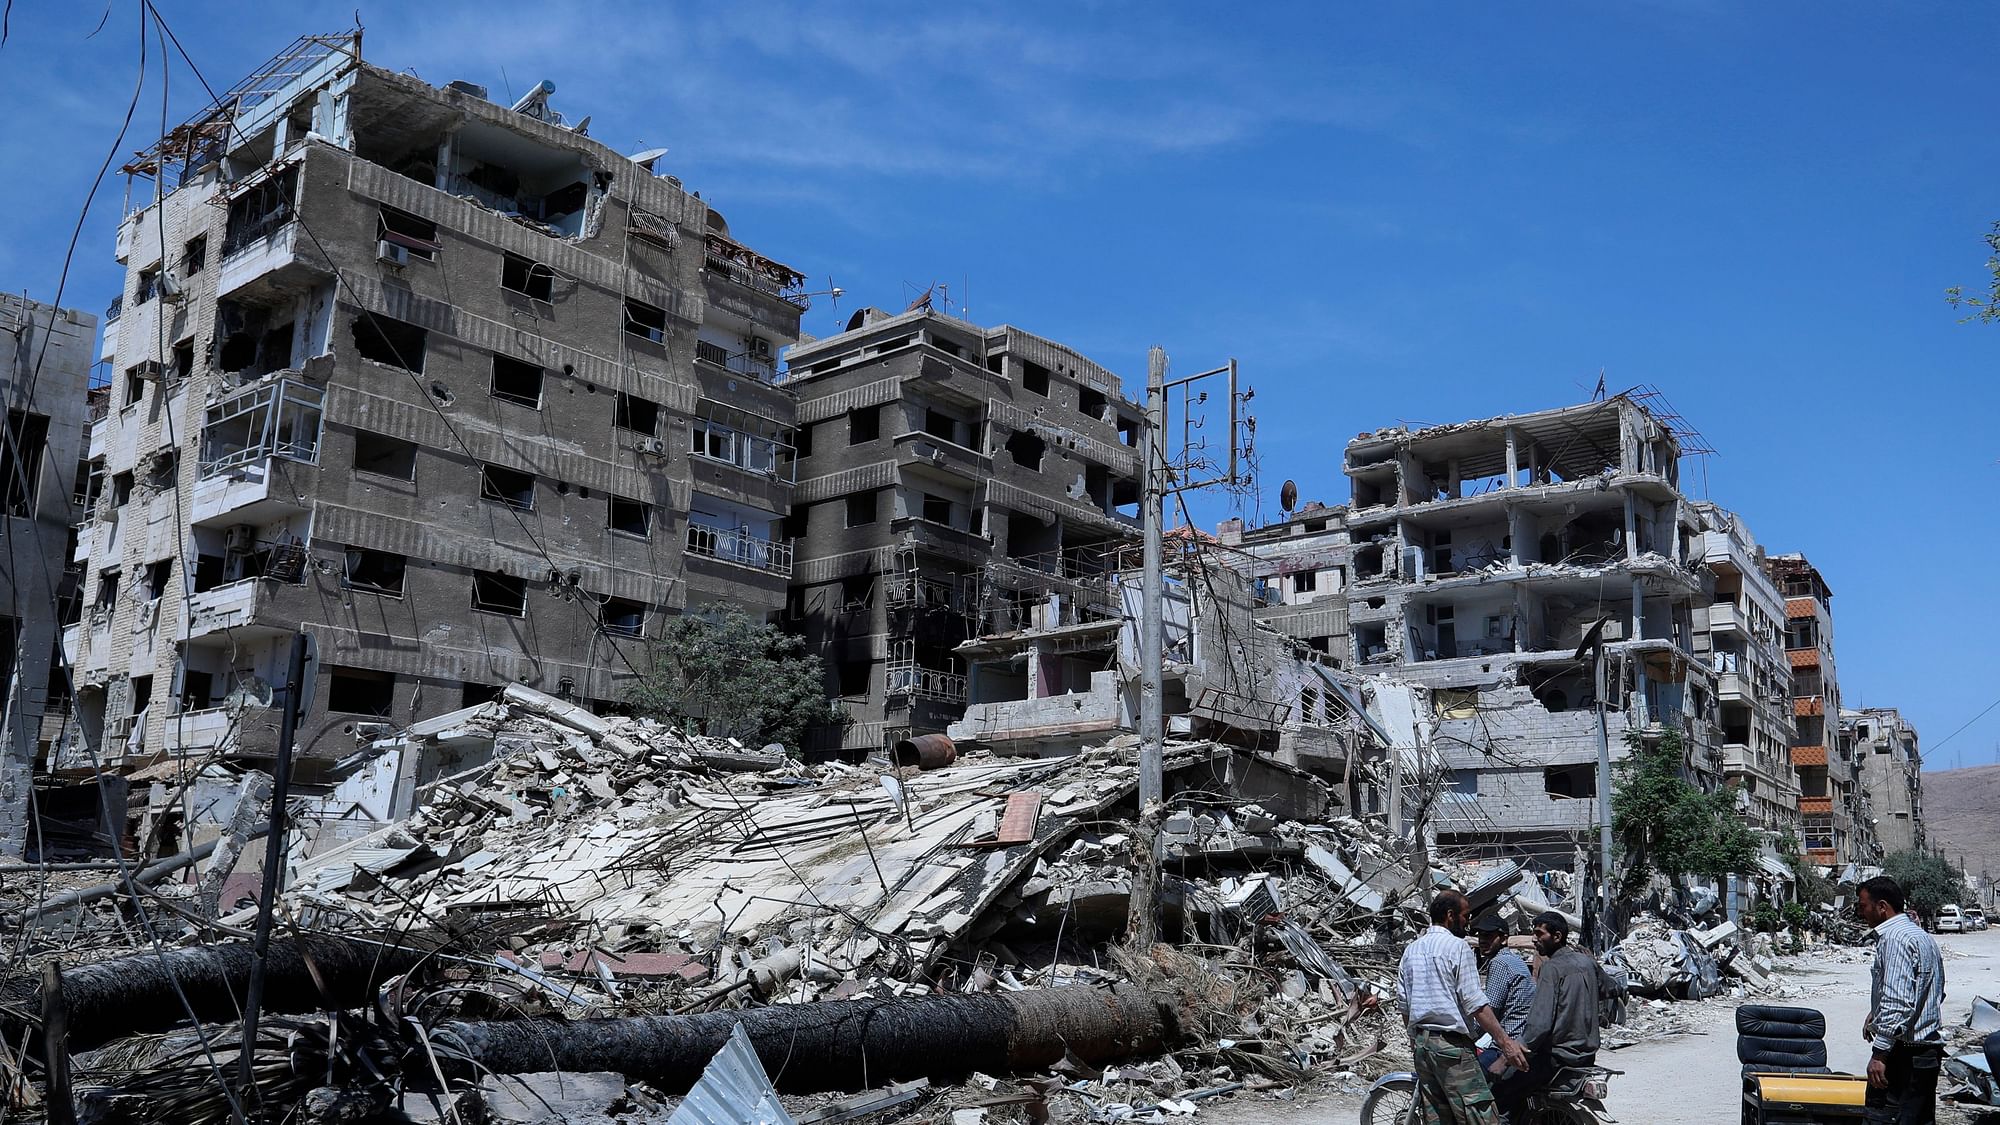 In this 16 April 2018 file photo, people stand in front of damaged buildings, in the town of Douma, the site of a suspected chemical weapons attack, near Damascus, Syria.